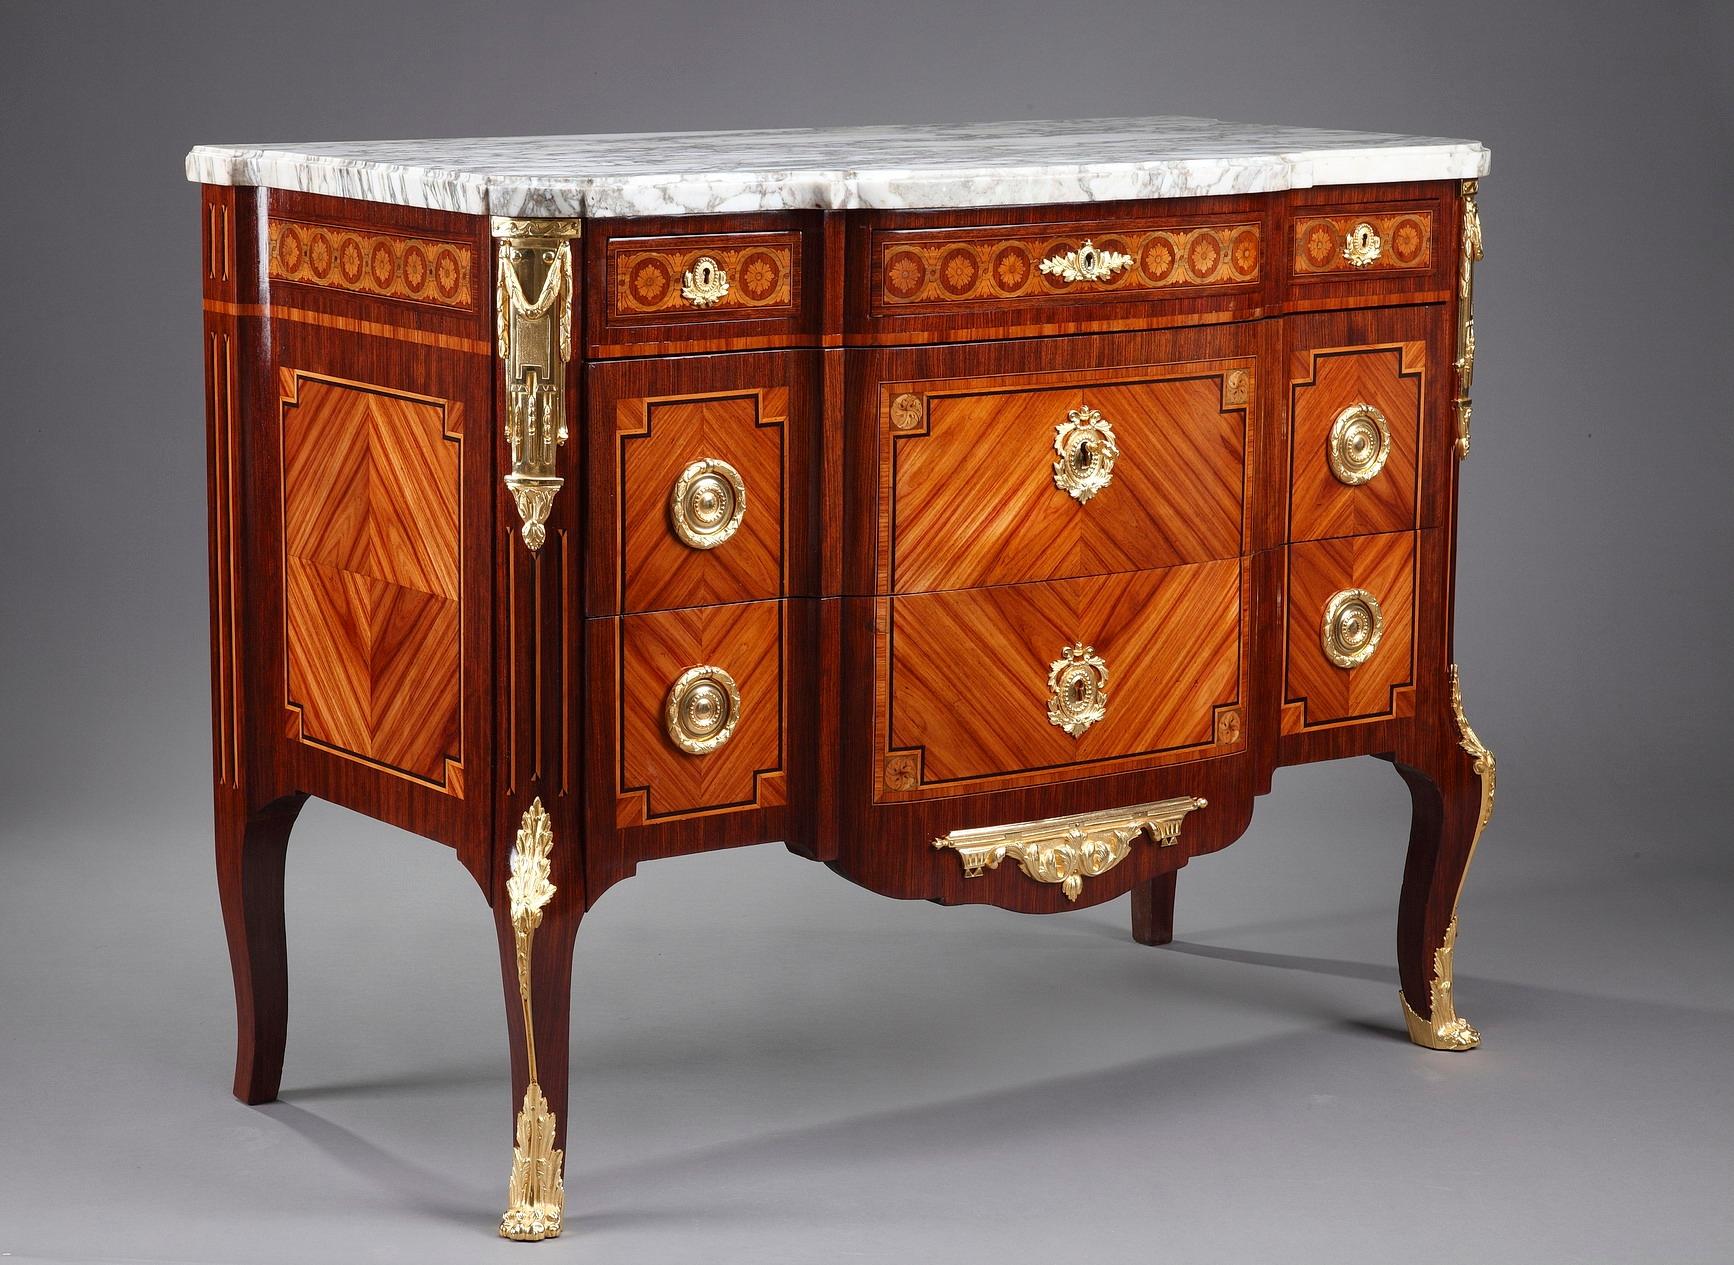 Late 19th Century Commode in Transitional Style (19. Jahrhundert)